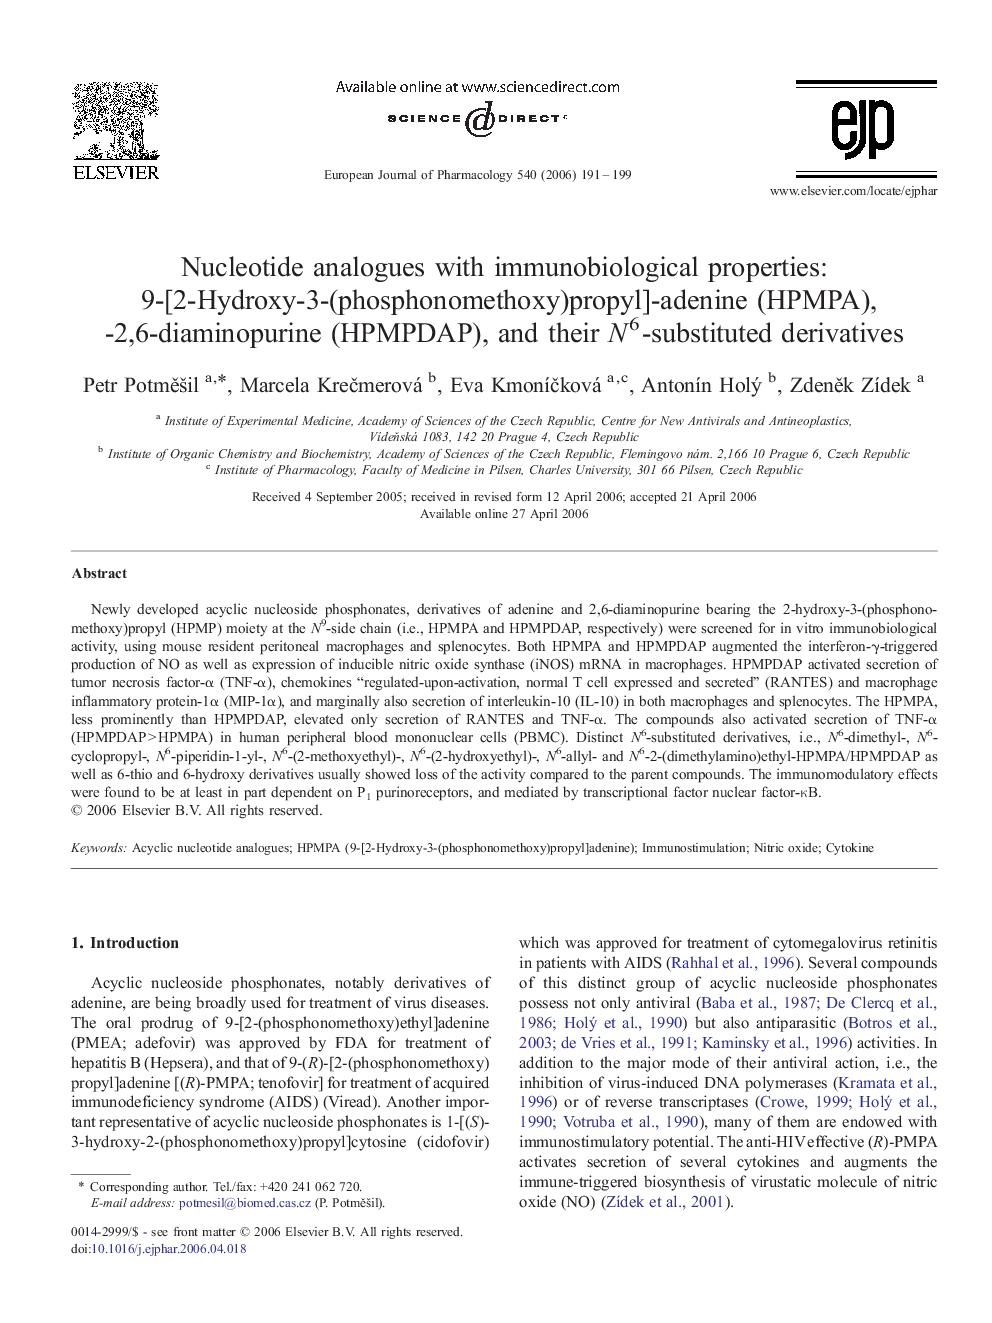 Nucleotide analogues with immunobiological properties: 9-[2-Hydroxy-3-(phosphonomethoxy)propyl]-adenine (HPMPA), -2,6-diaminopurine (HPMPDAP), and their N6-substituted derivatives